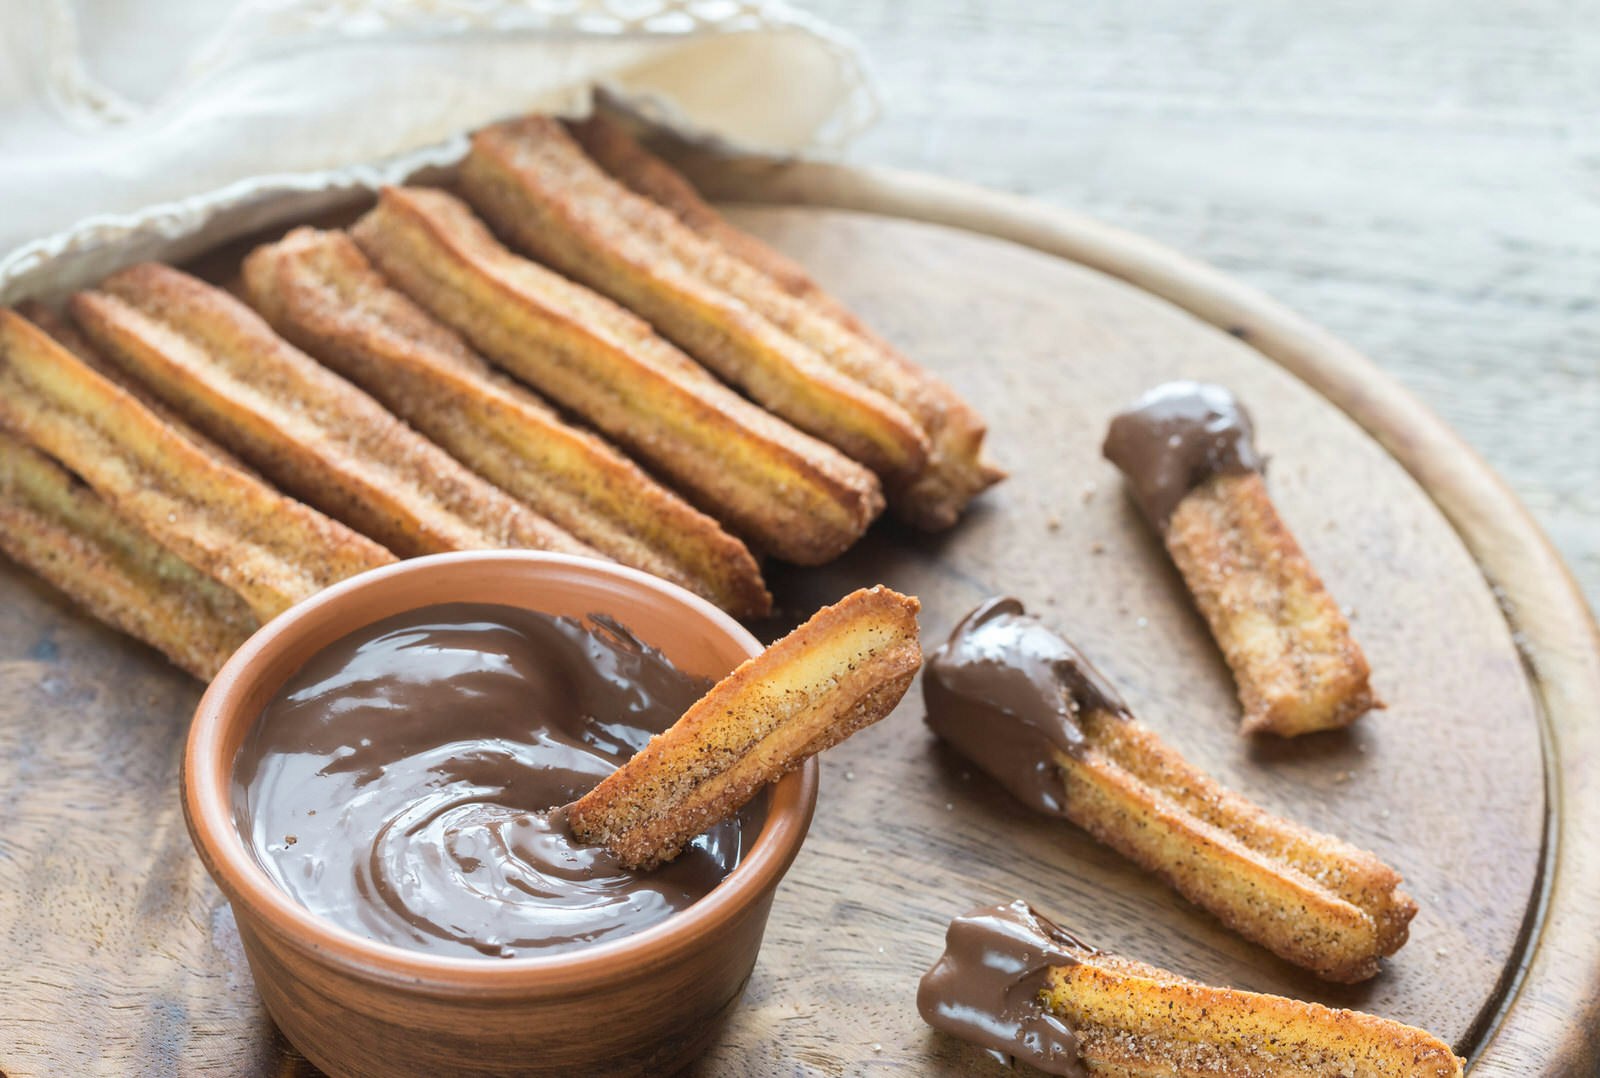 Several churros served on a round, wooden chopping board alongside a terracotta ramekin of chocolate sauce. 